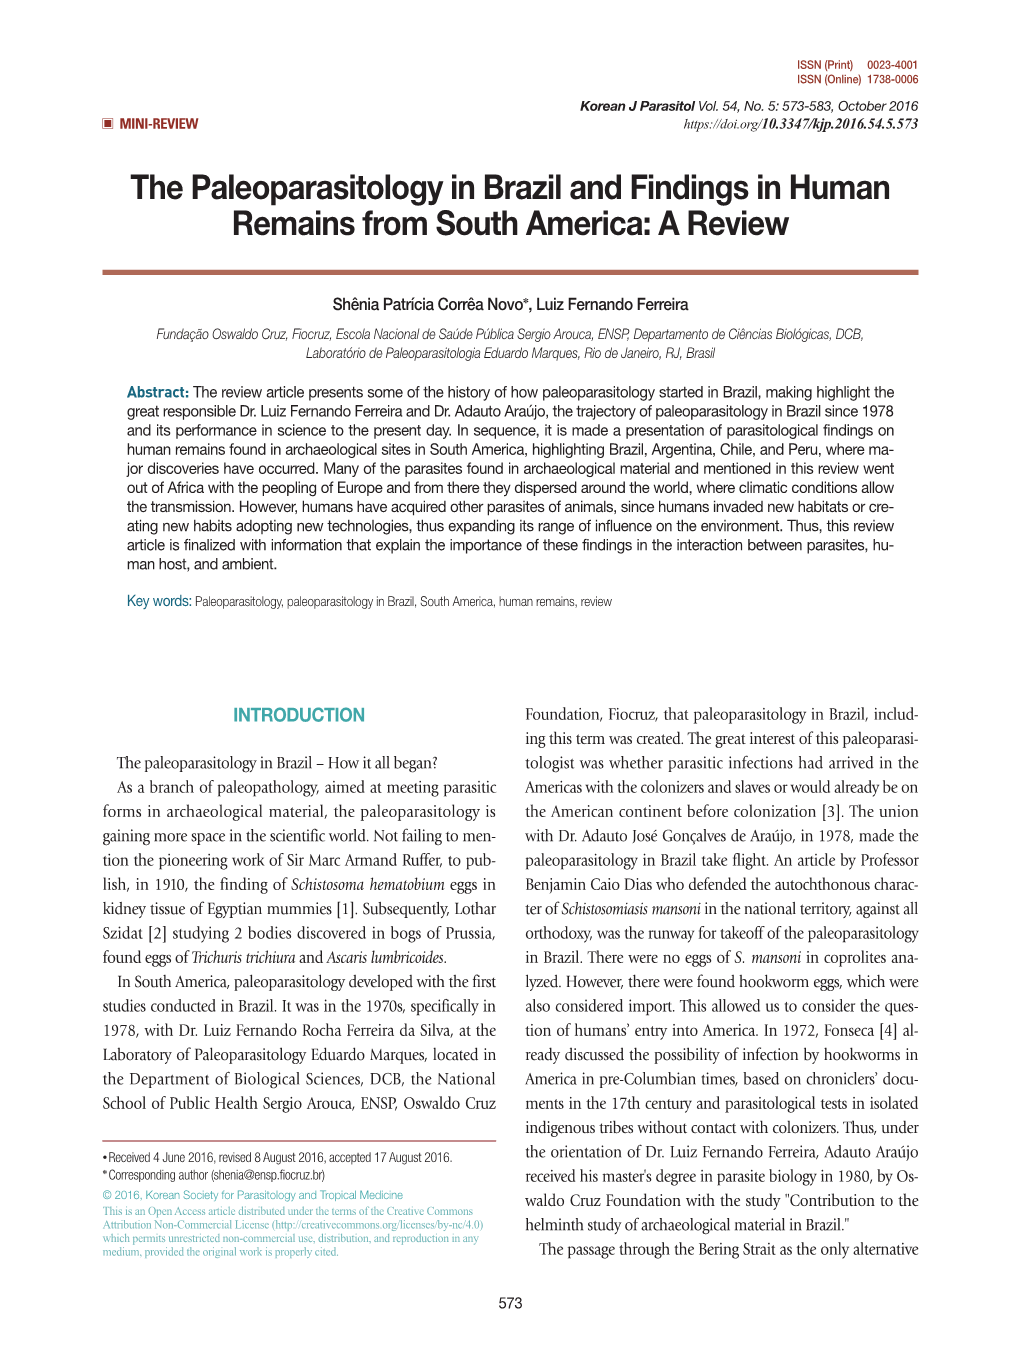 The Paleoparasitology in Brazil and Findings in Human Remains from South America: a Review